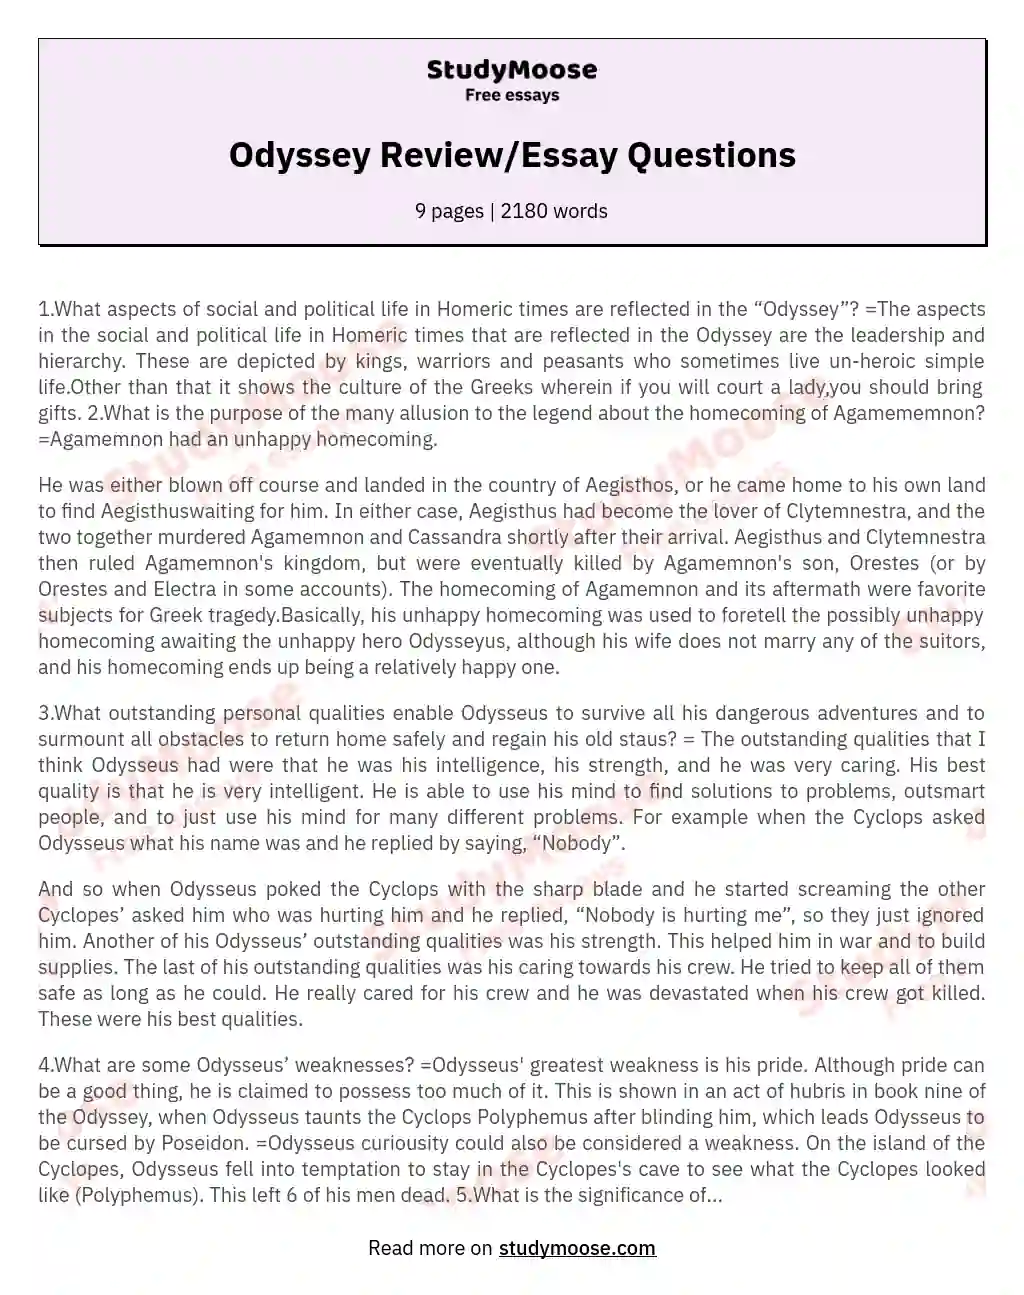 Odyssey Review/Essay Questions